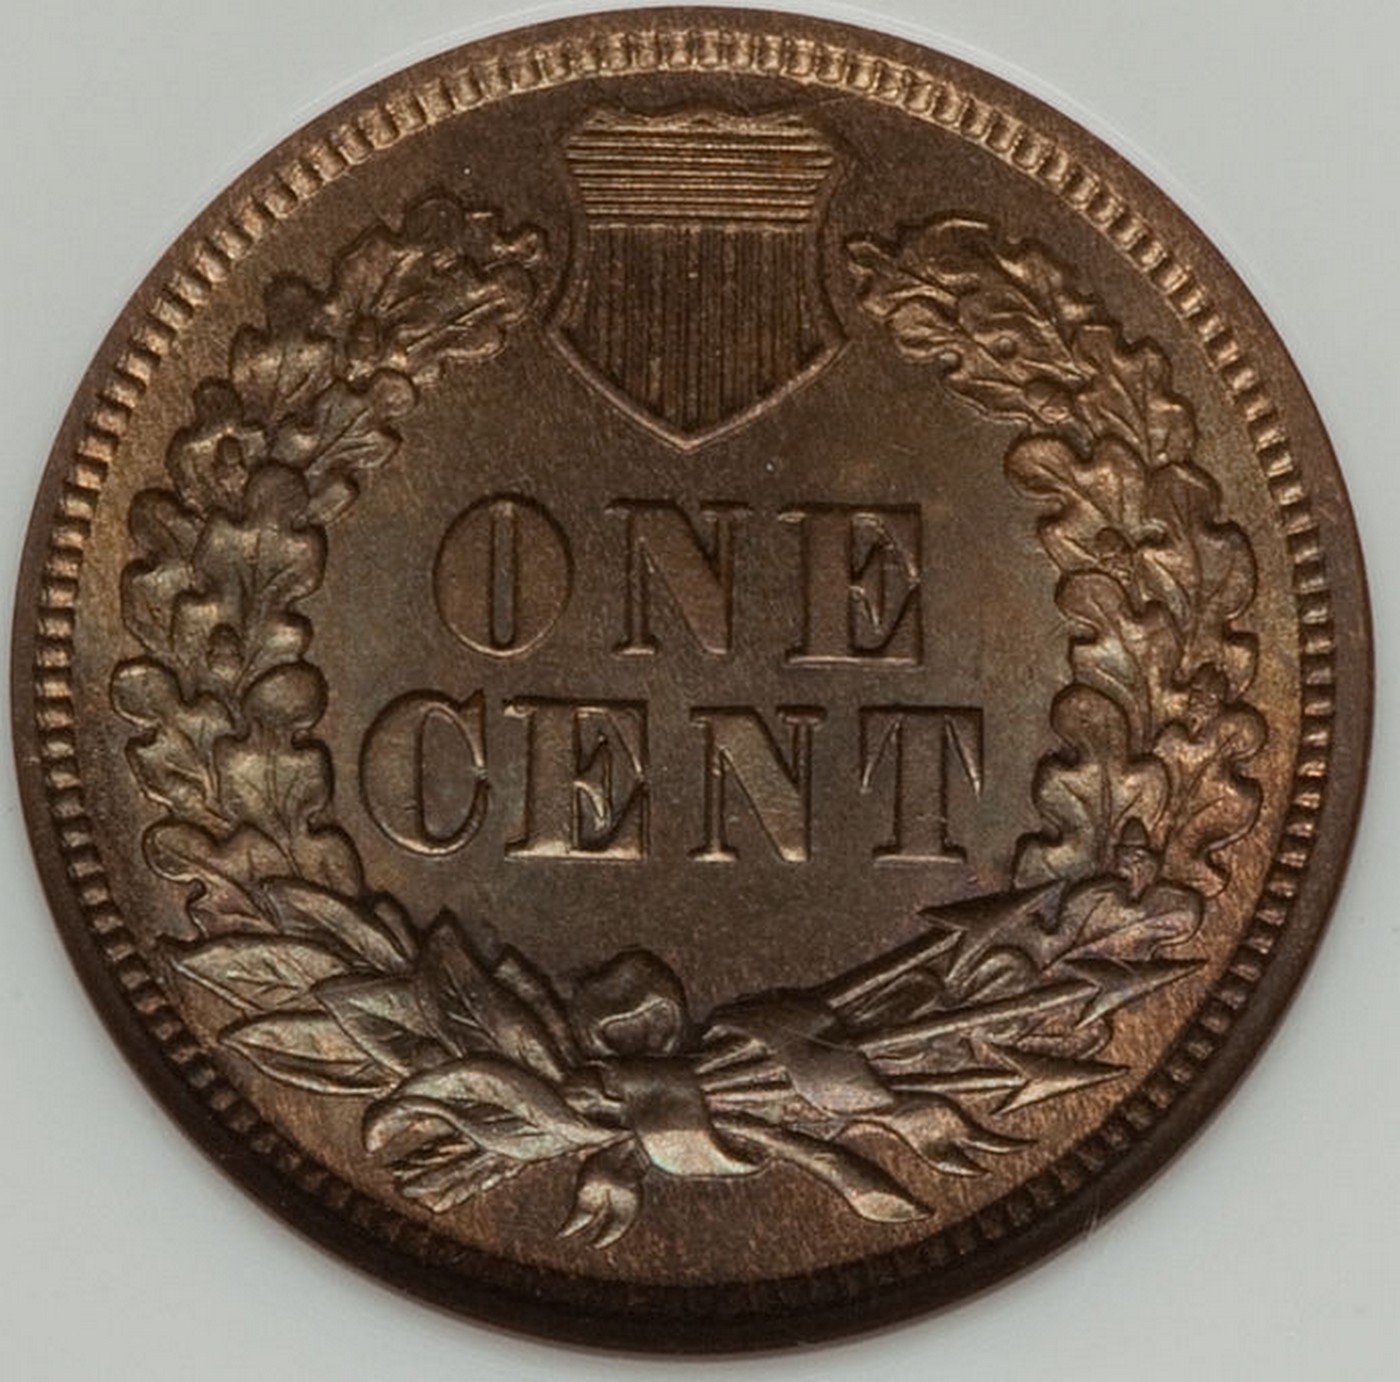 1870 DDR-017 Indian Head Penny - Photos courtesy of Heritage Auctions